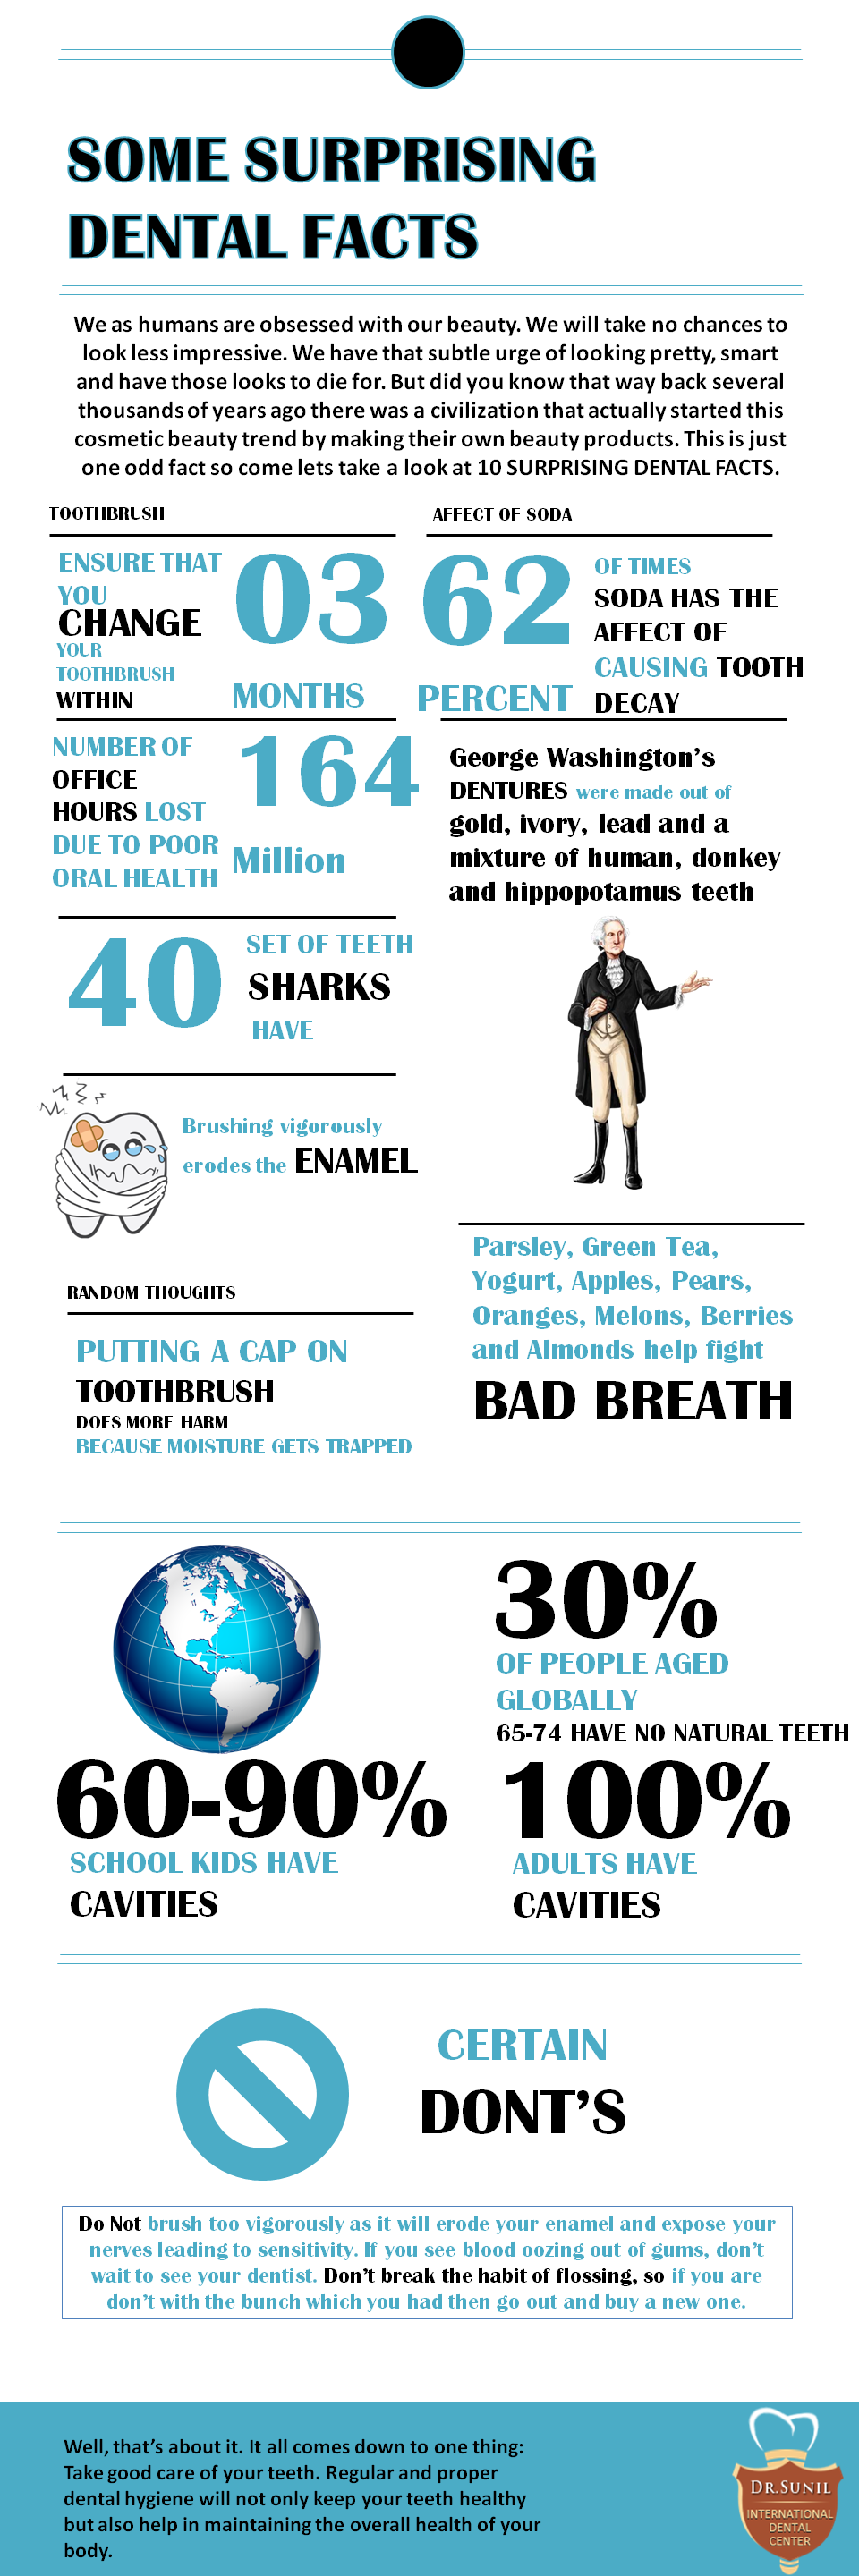 SOME SURPRISING DENTAL FACTS